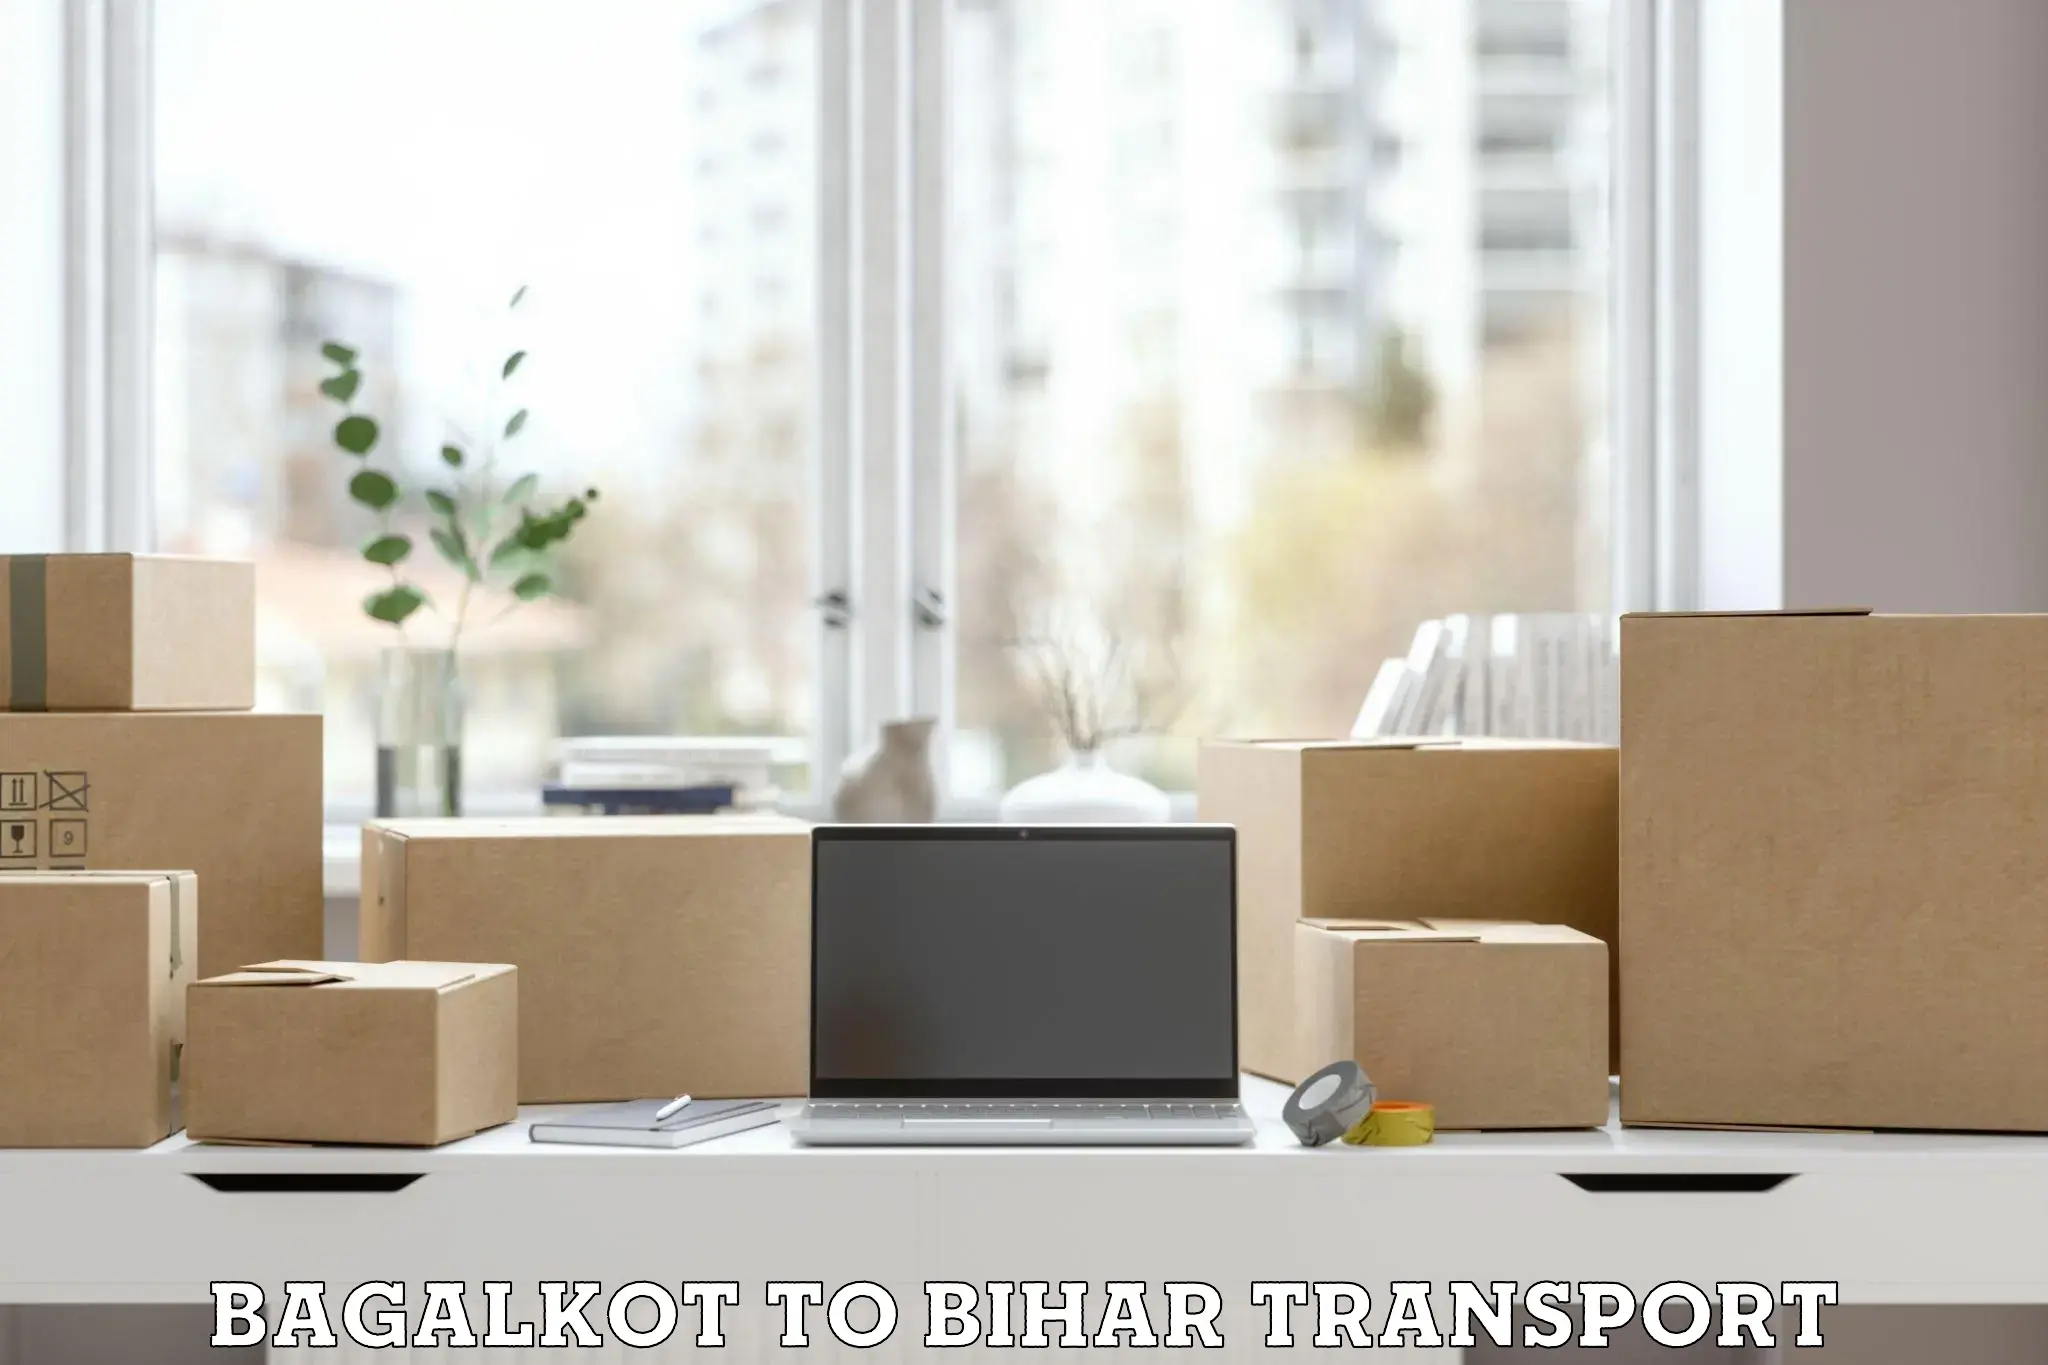 Container transportation services Bagalkot to Kuchaikote